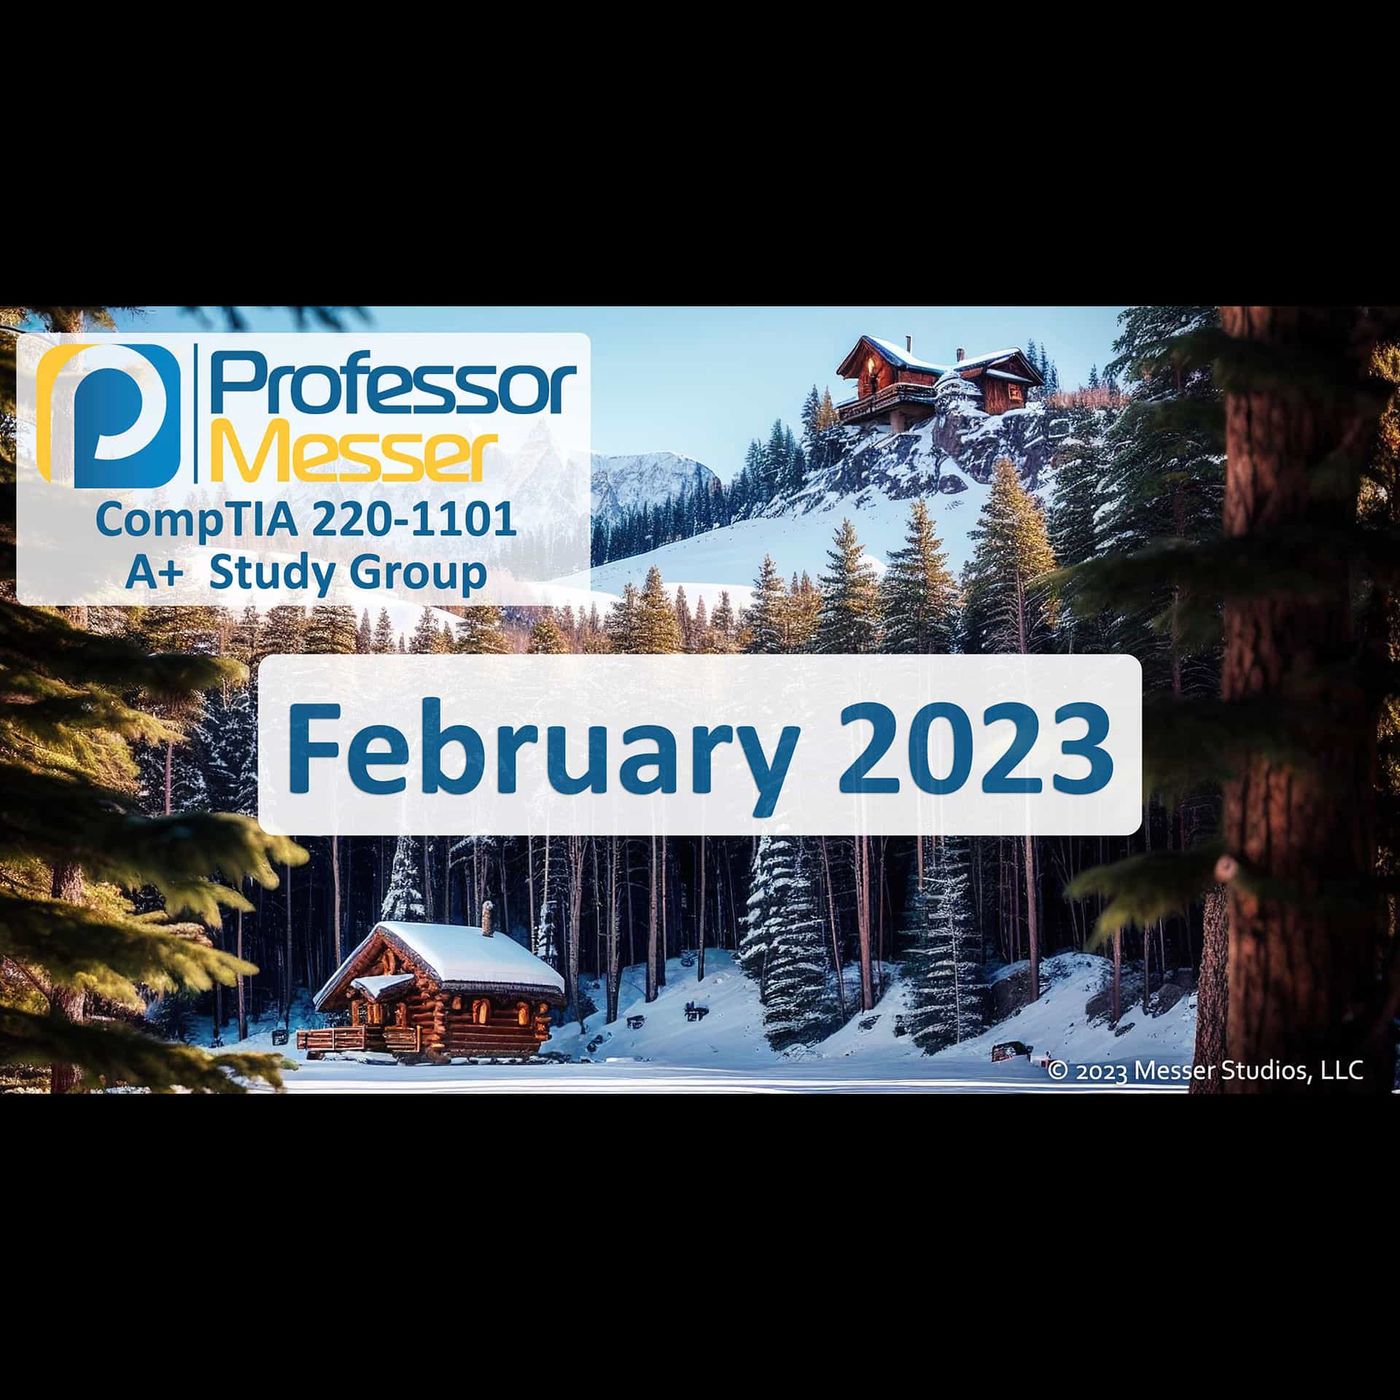 Professor Messer's CompTIA 220-1101 A+ Study Group After Show - February 2023